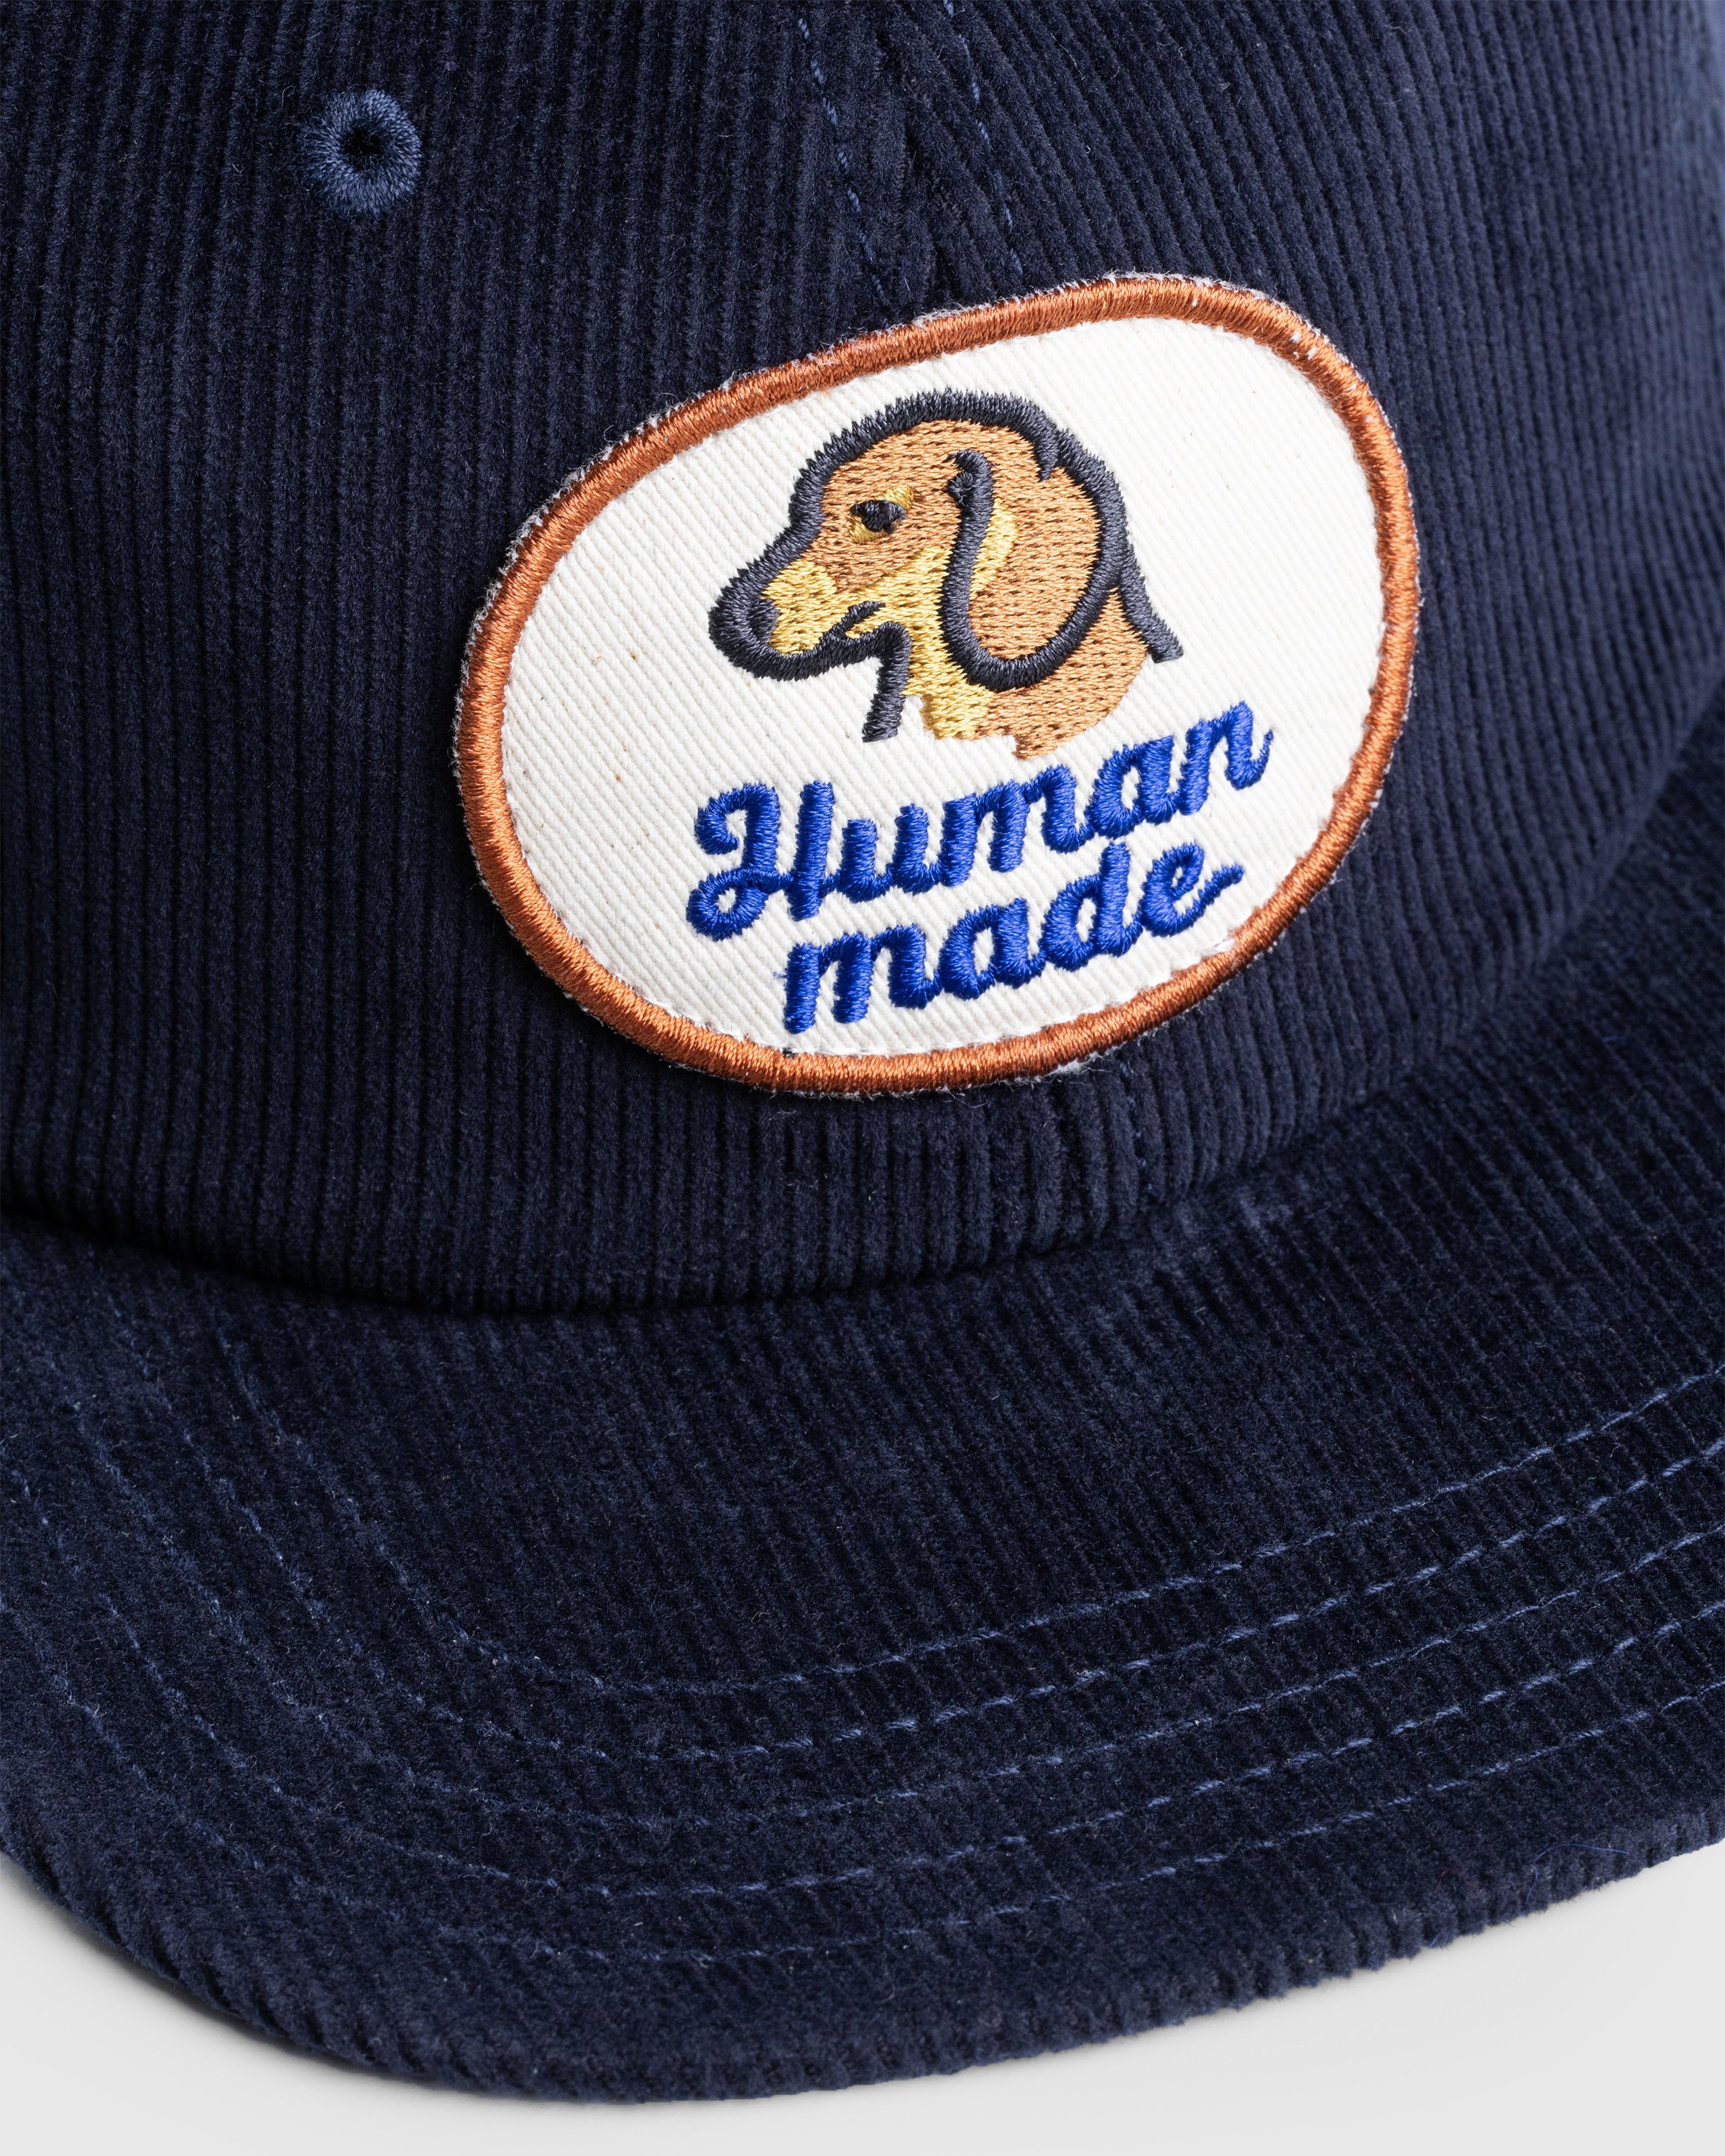 Human Made - 6-Panel Corduroy Cap Navy - Accessories - Blue - Image 6